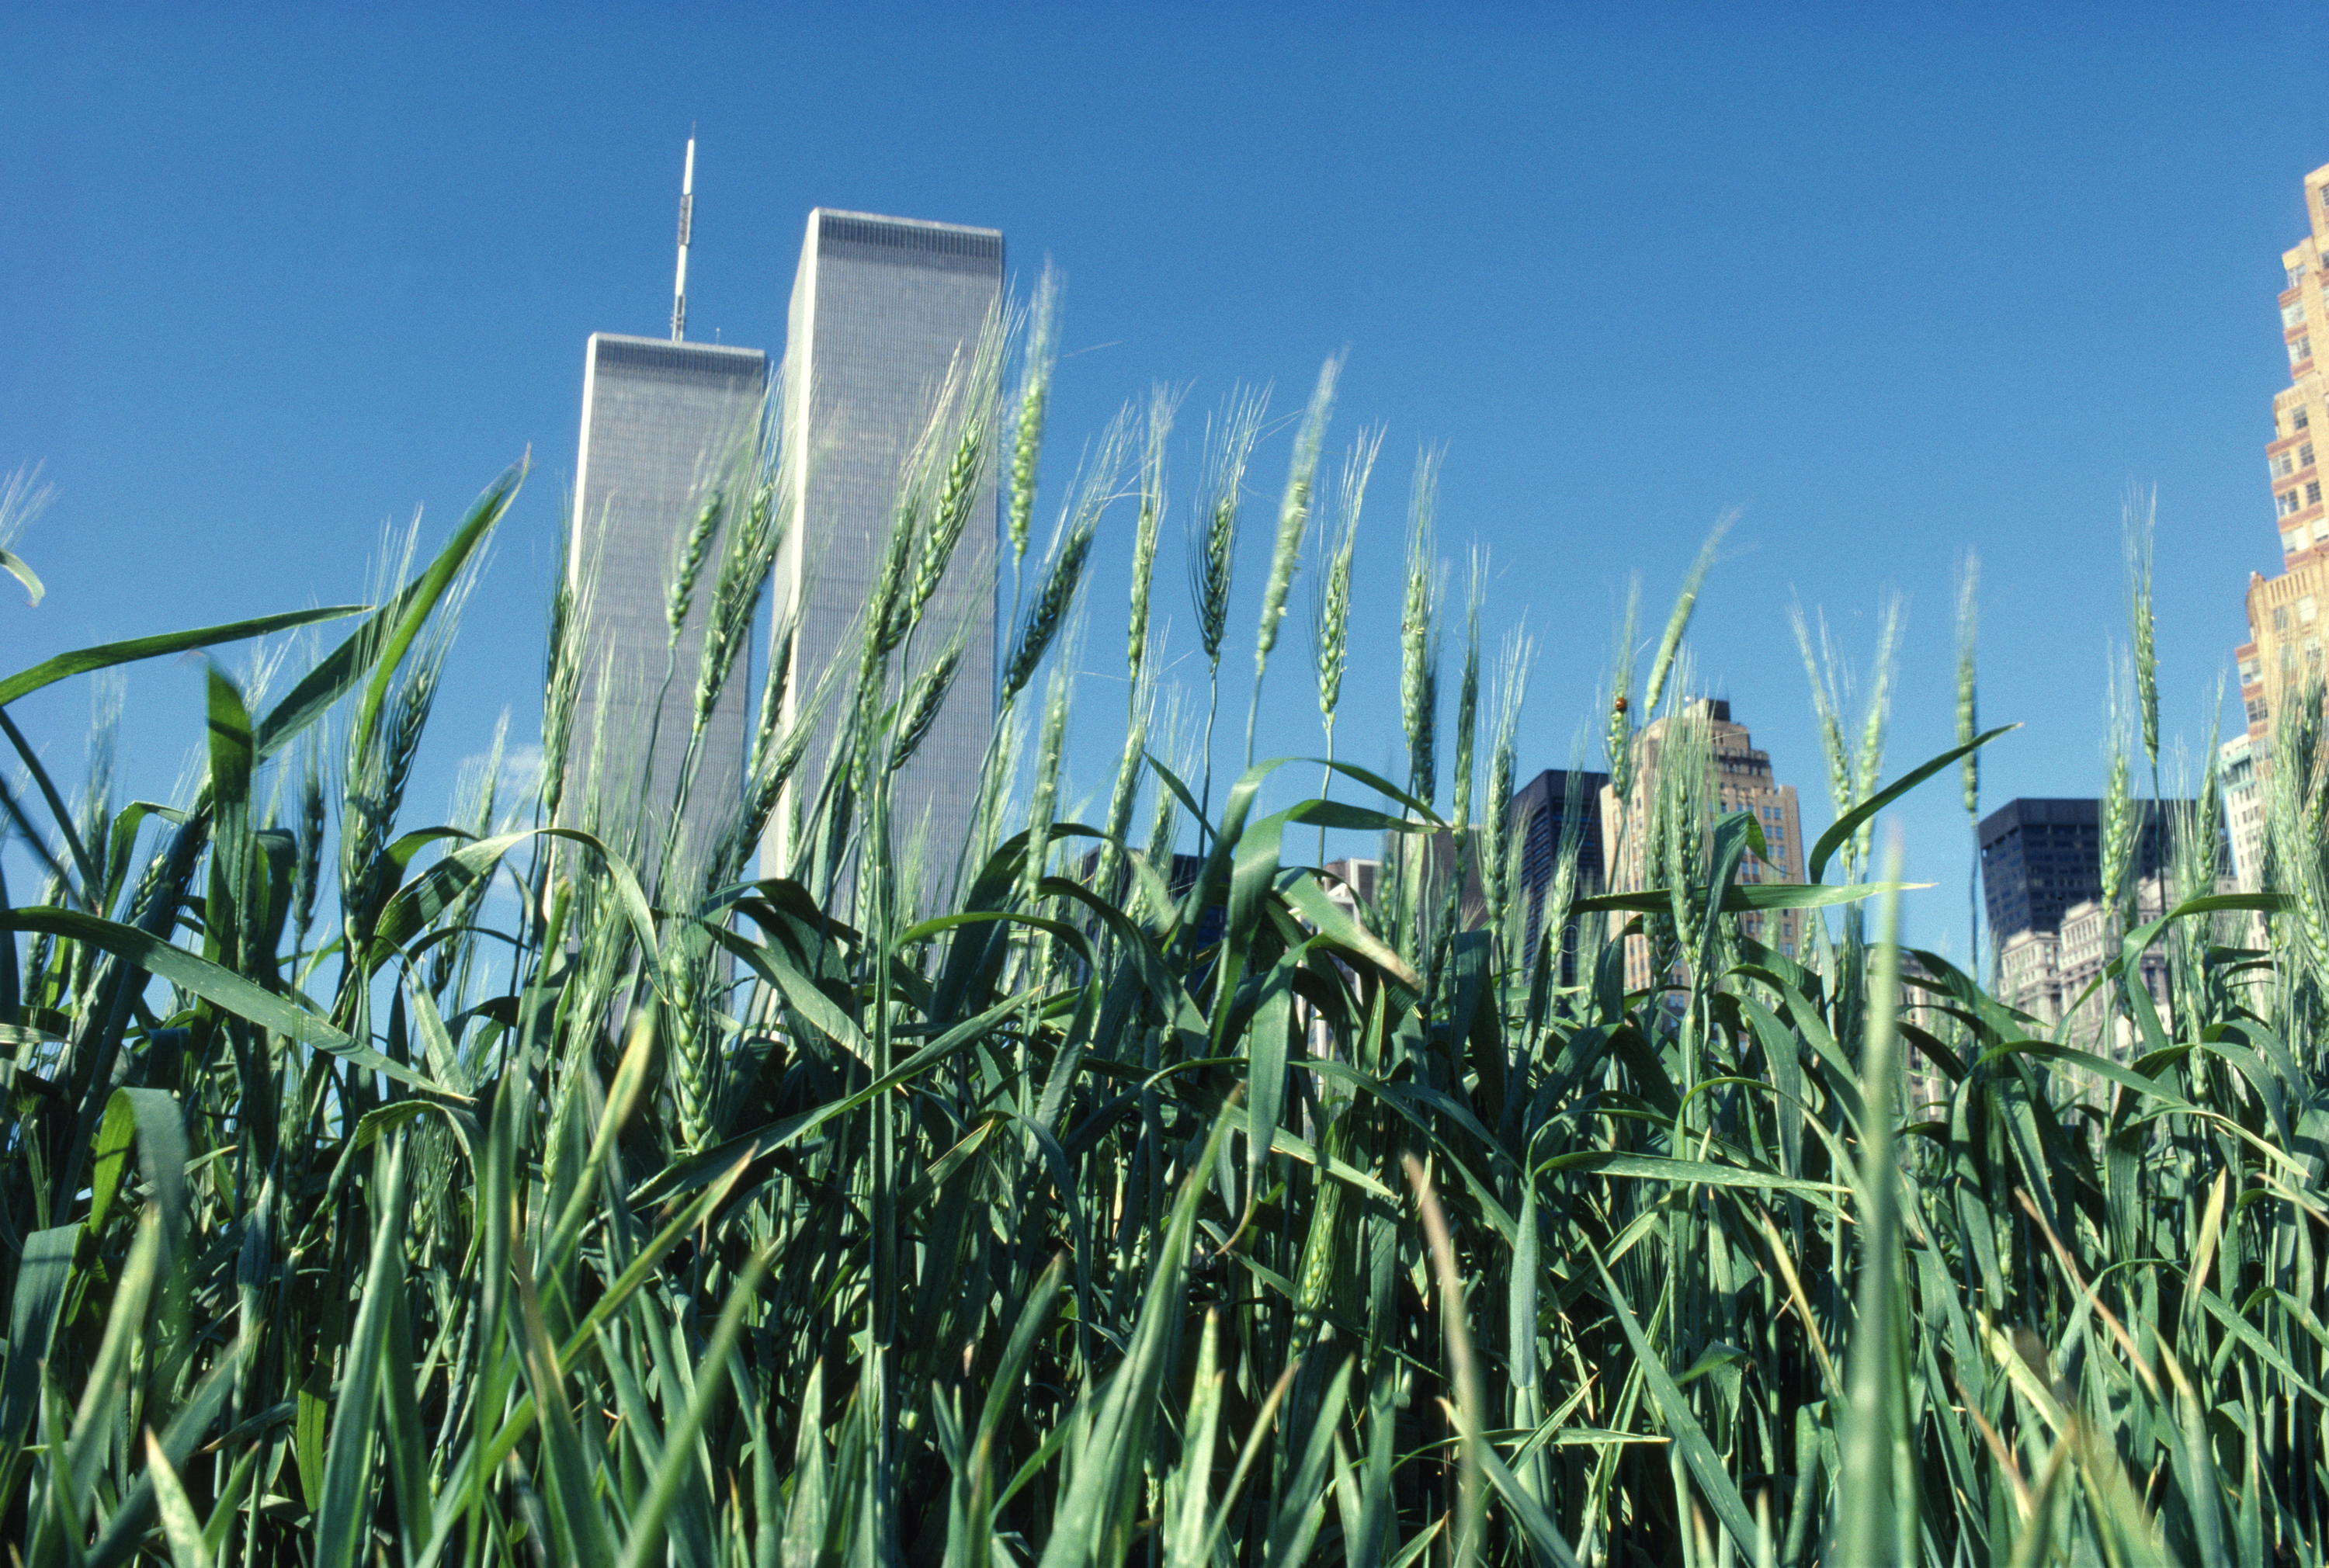 Wheatfield - A Confrontation: Battery Park Landfill, Downtown Manhattan ­- Green Wheat, 1982. Photo courtesy of artist and Leslie Tonkonow Artworks + Projects.